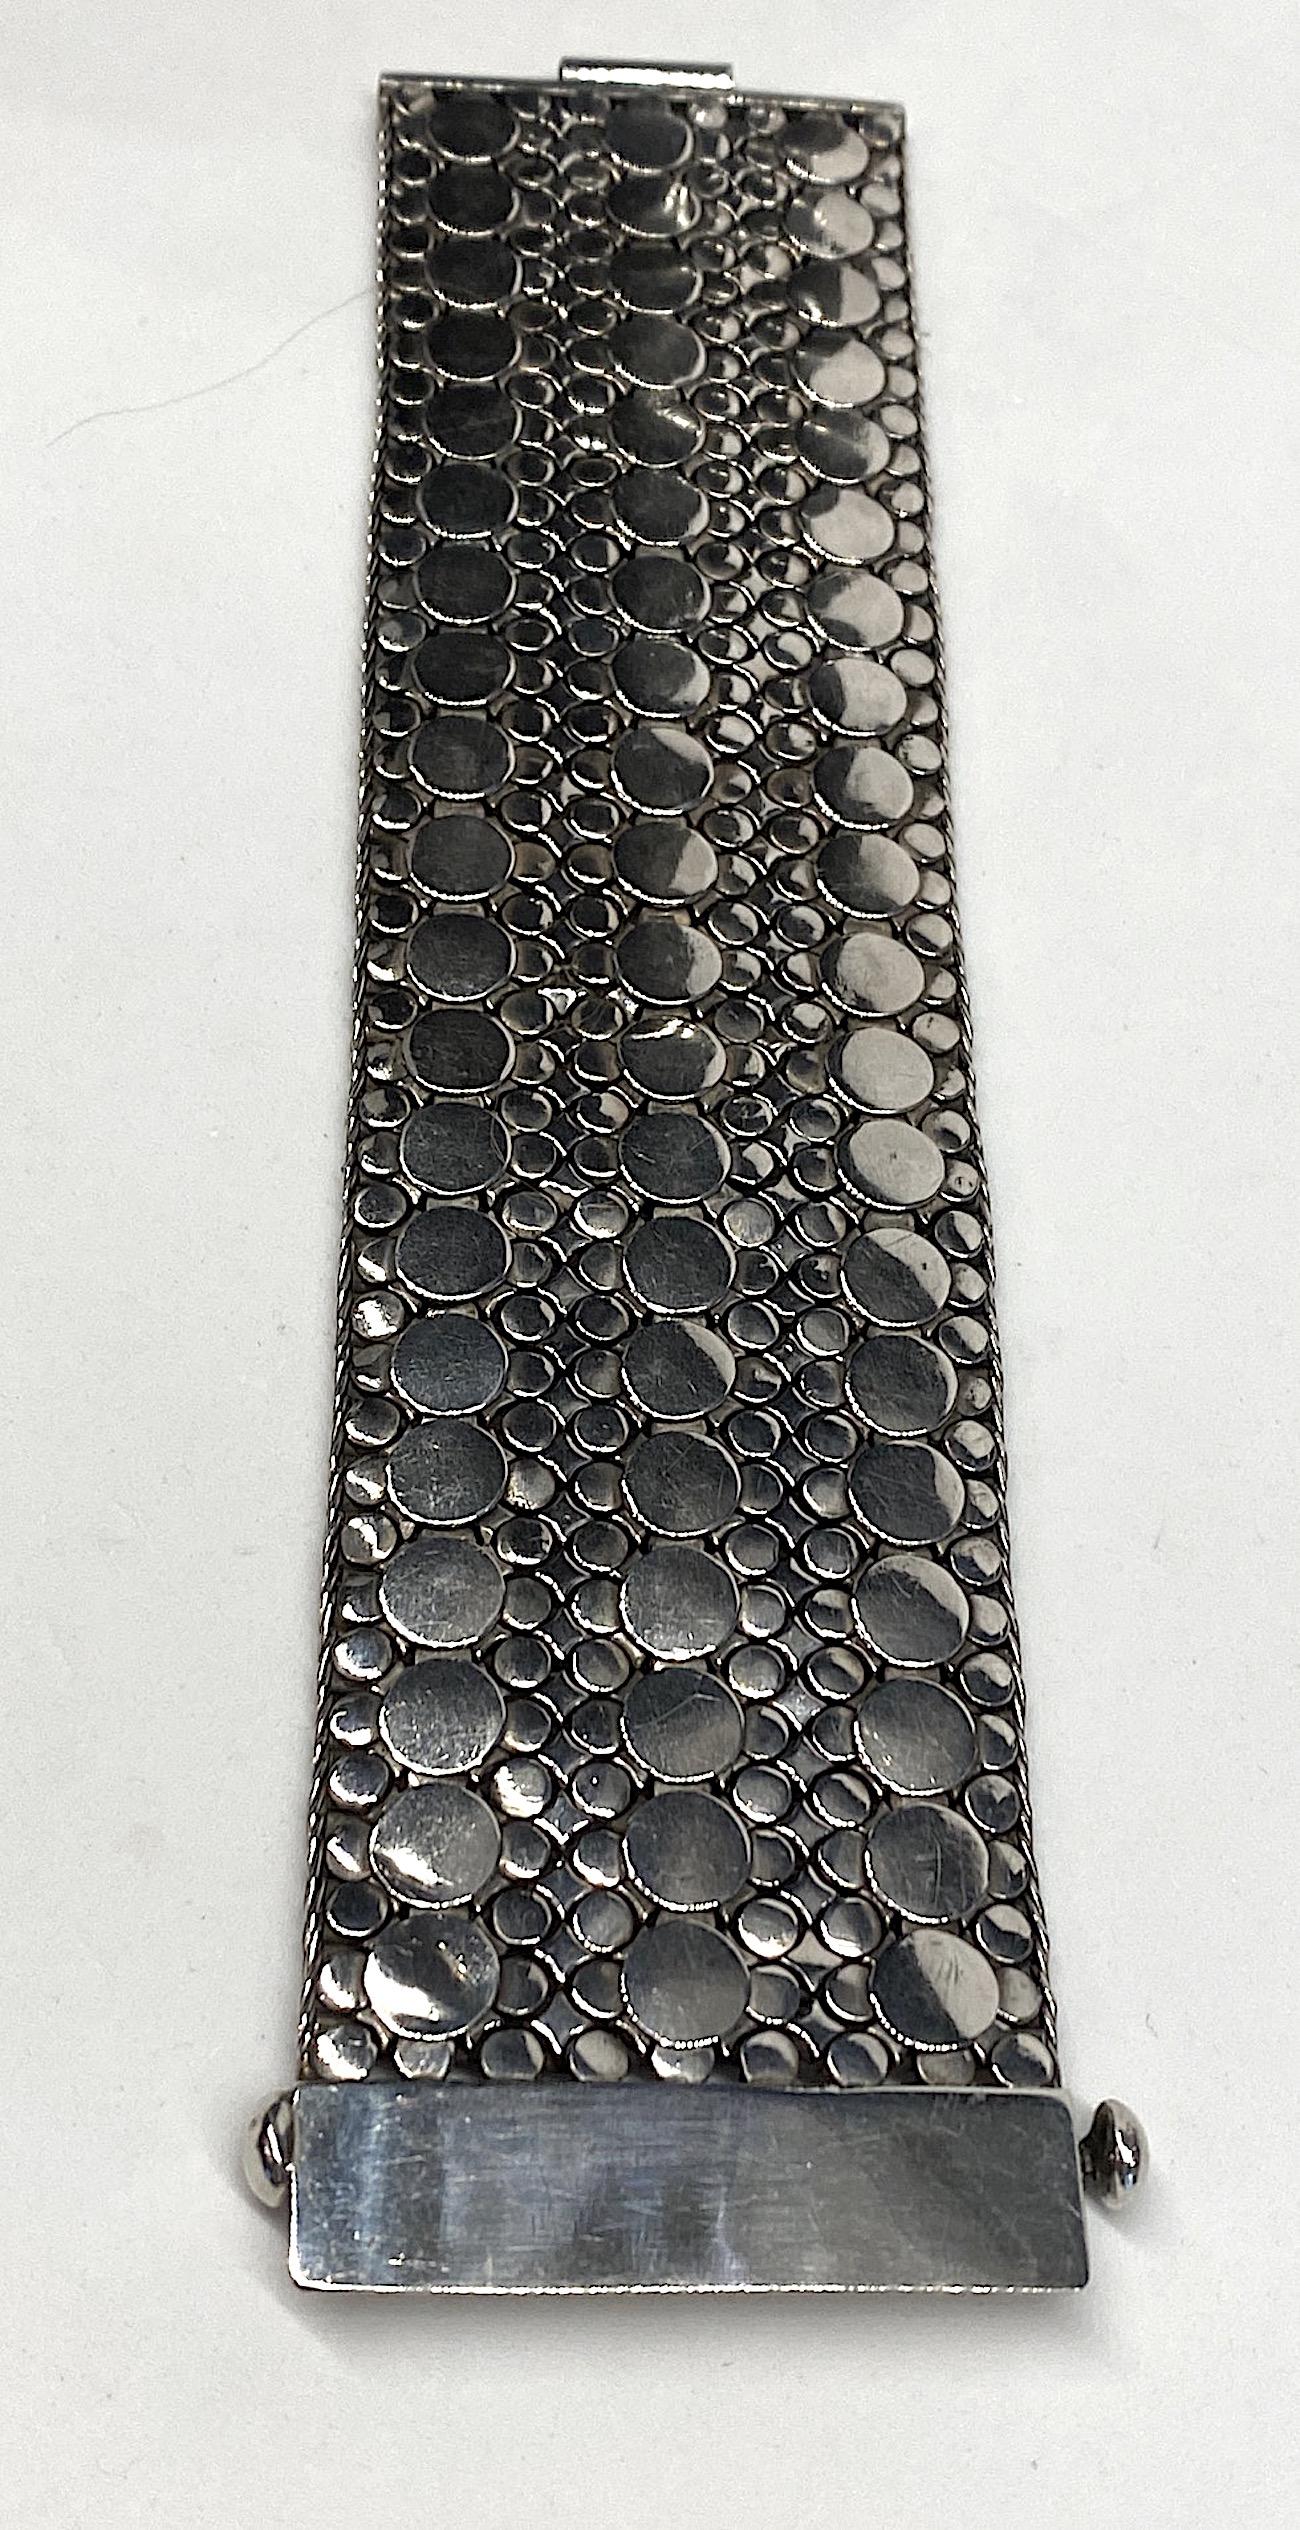 A very impressive sterling silver hand made for a man or woman. The back layer of the bracelet is made up of 1/8 inch wide links woven together finishing white the top layer is made up of applied large and small disks. It is 8.75 inches long and